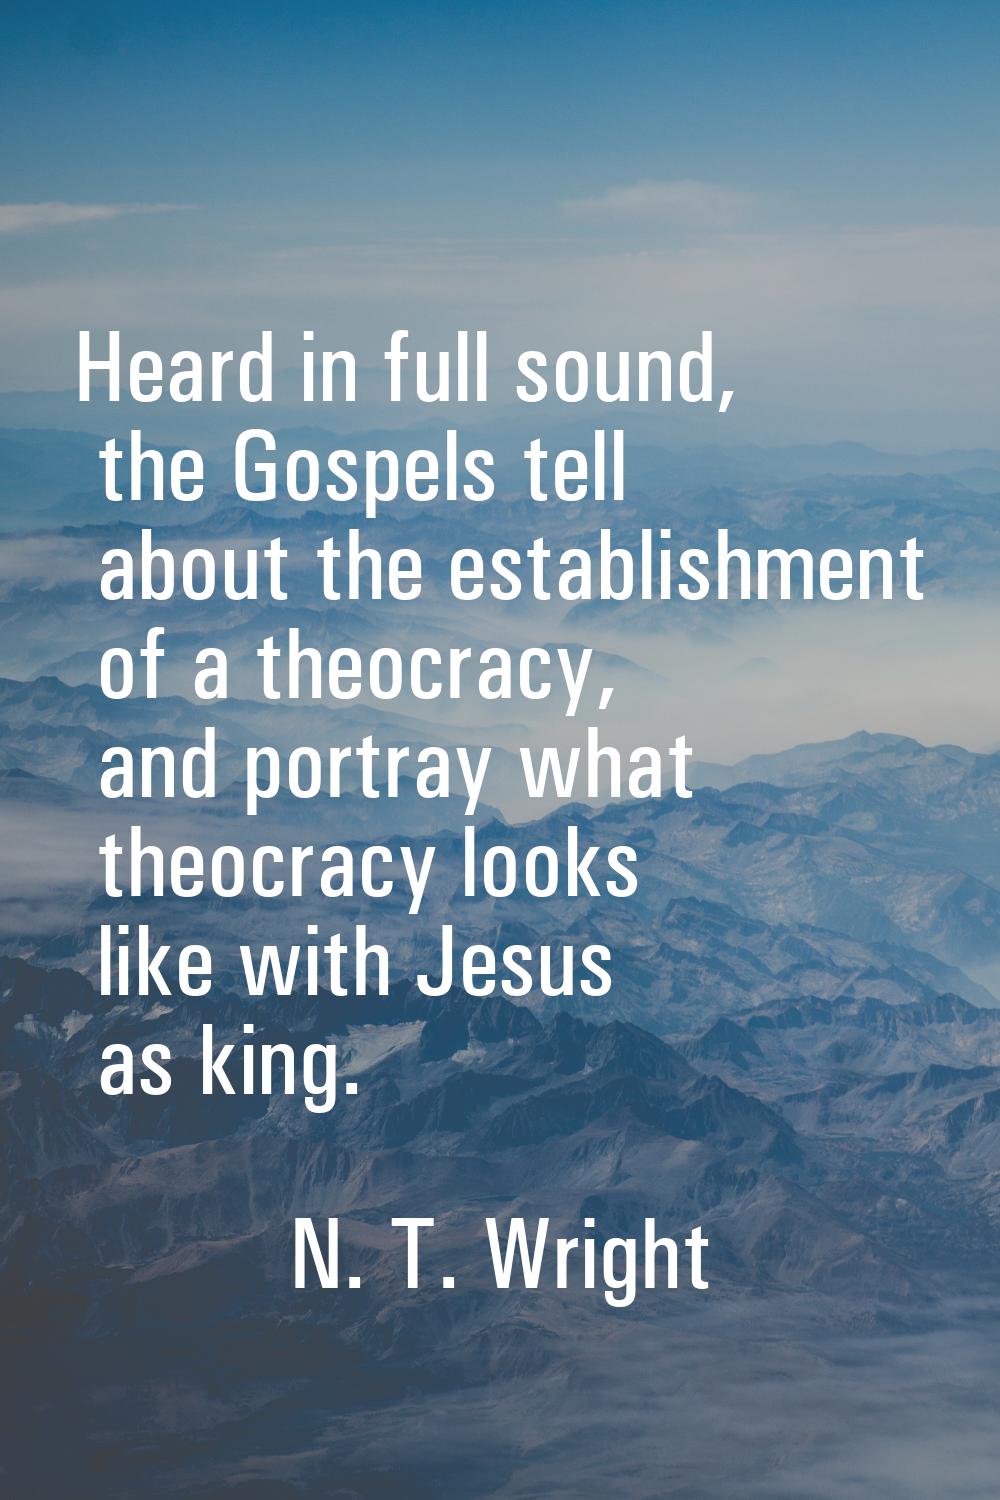 Heard in full sound, the Gospels tell about the establishment of a theocracy, and portray what theo